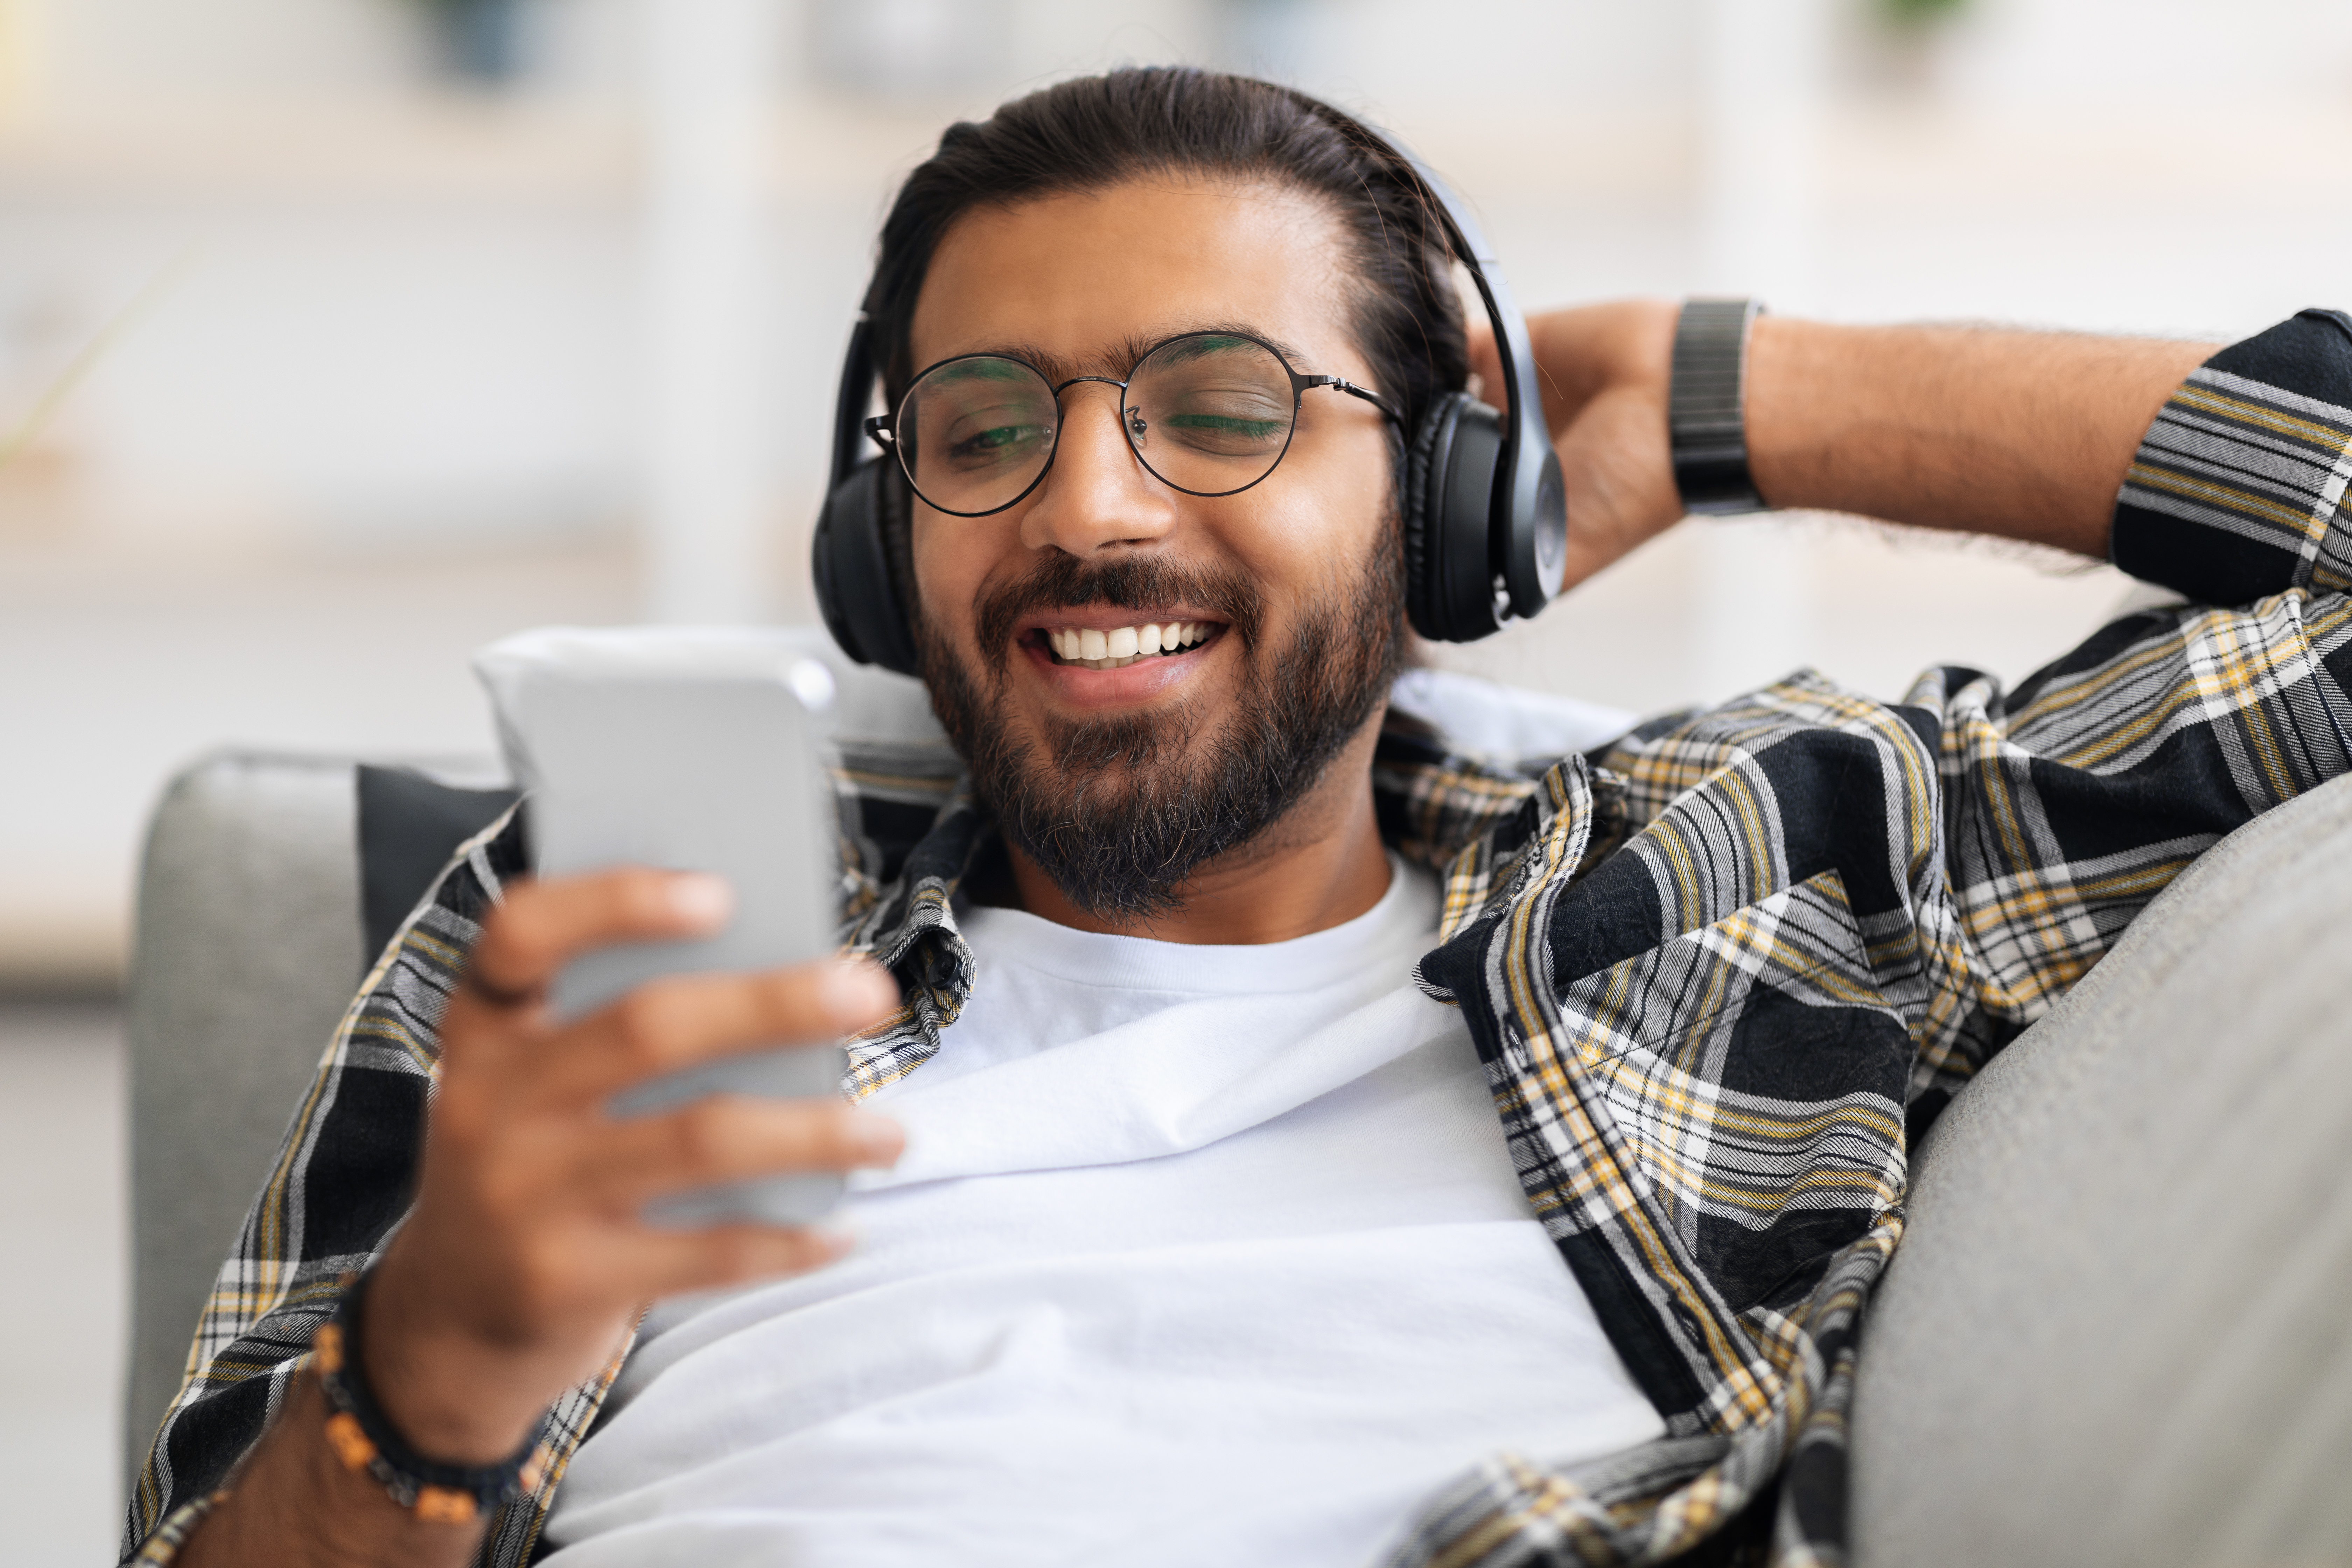 Young man relaxing looking at his phone and listening to music on headphones